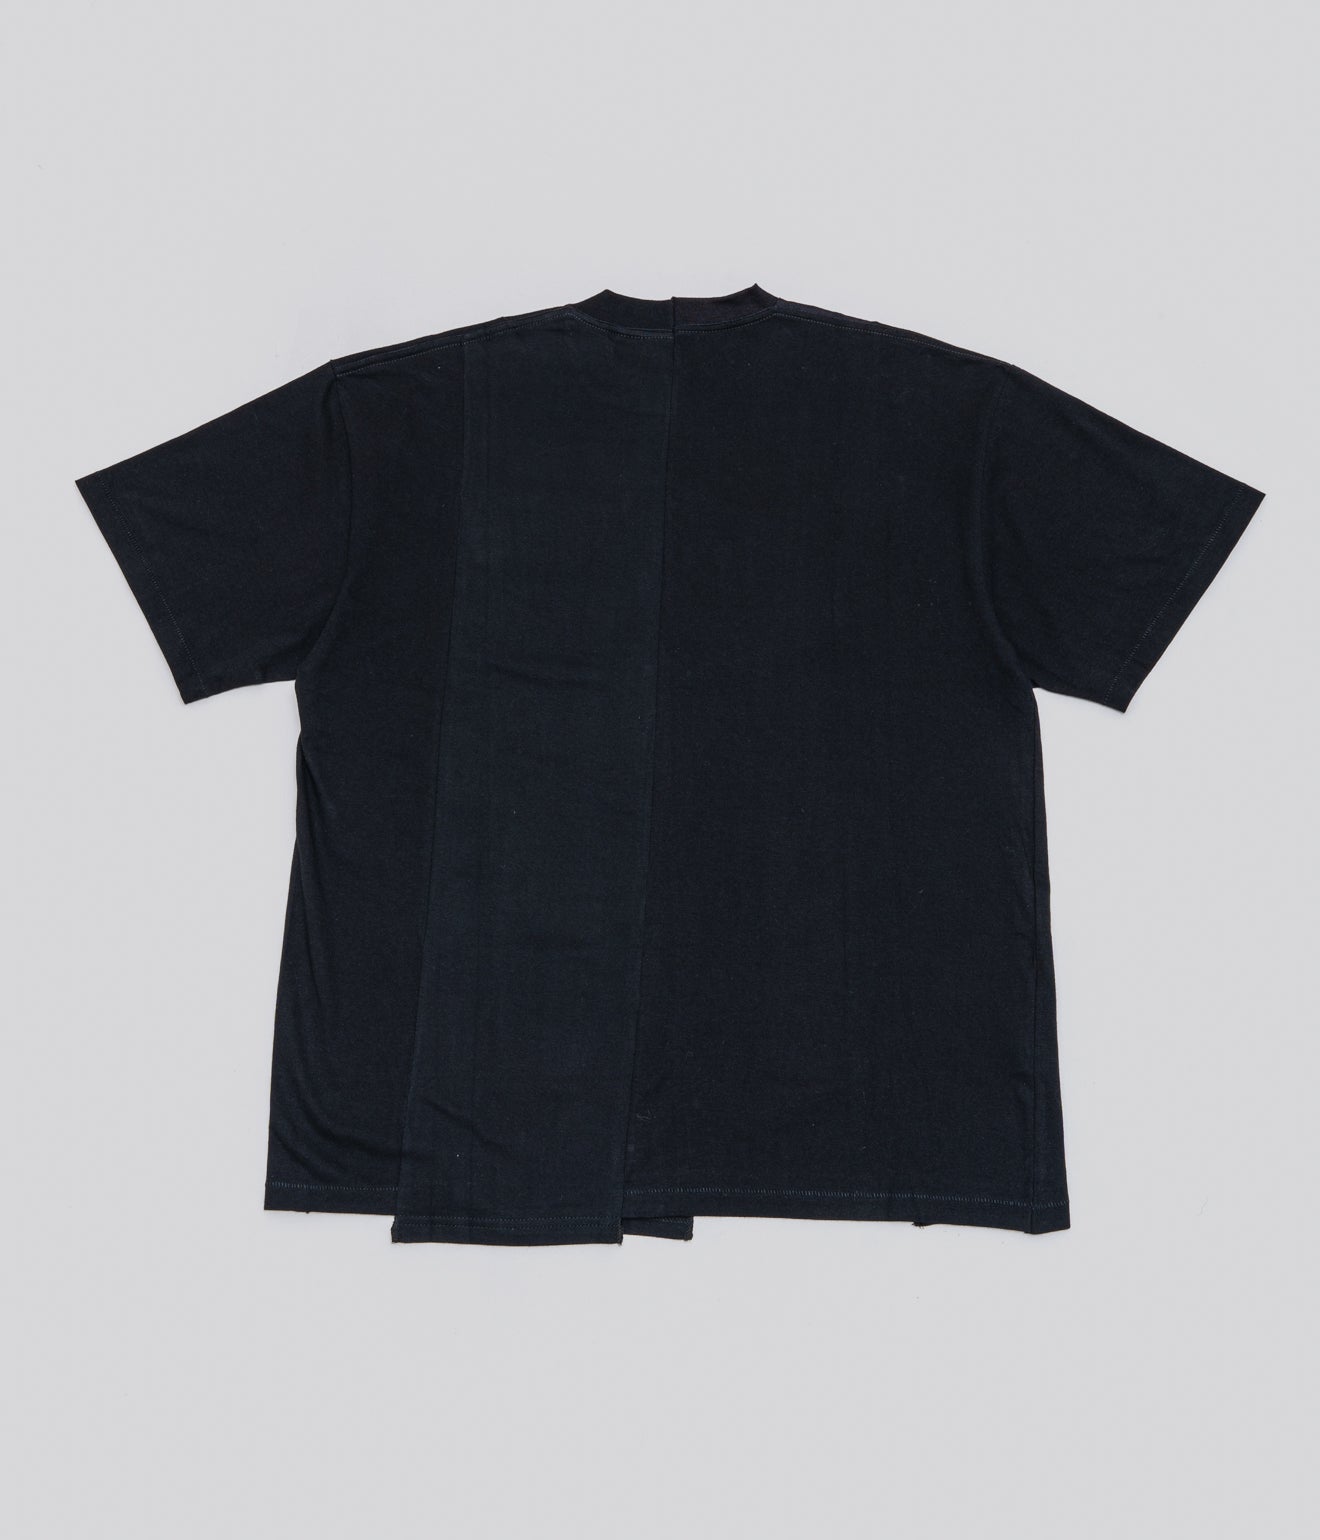 THE SALVAGES "SS23 RECONSTRUCTED T-SHIRT" Black - WEAREALLANIMALS